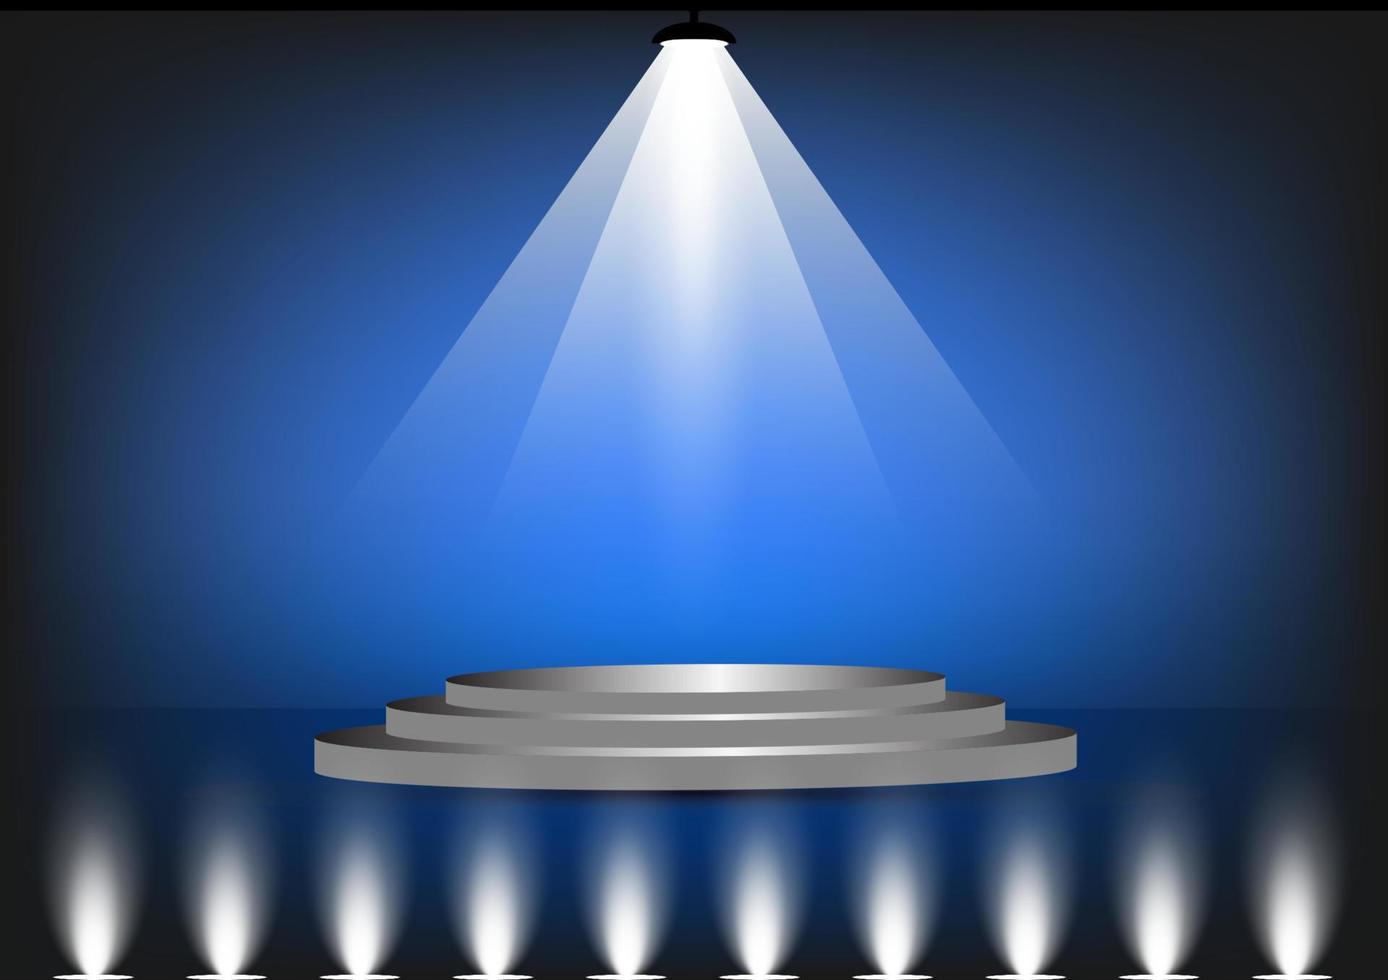 podium with spotlight for show with blue color tone wall background vector